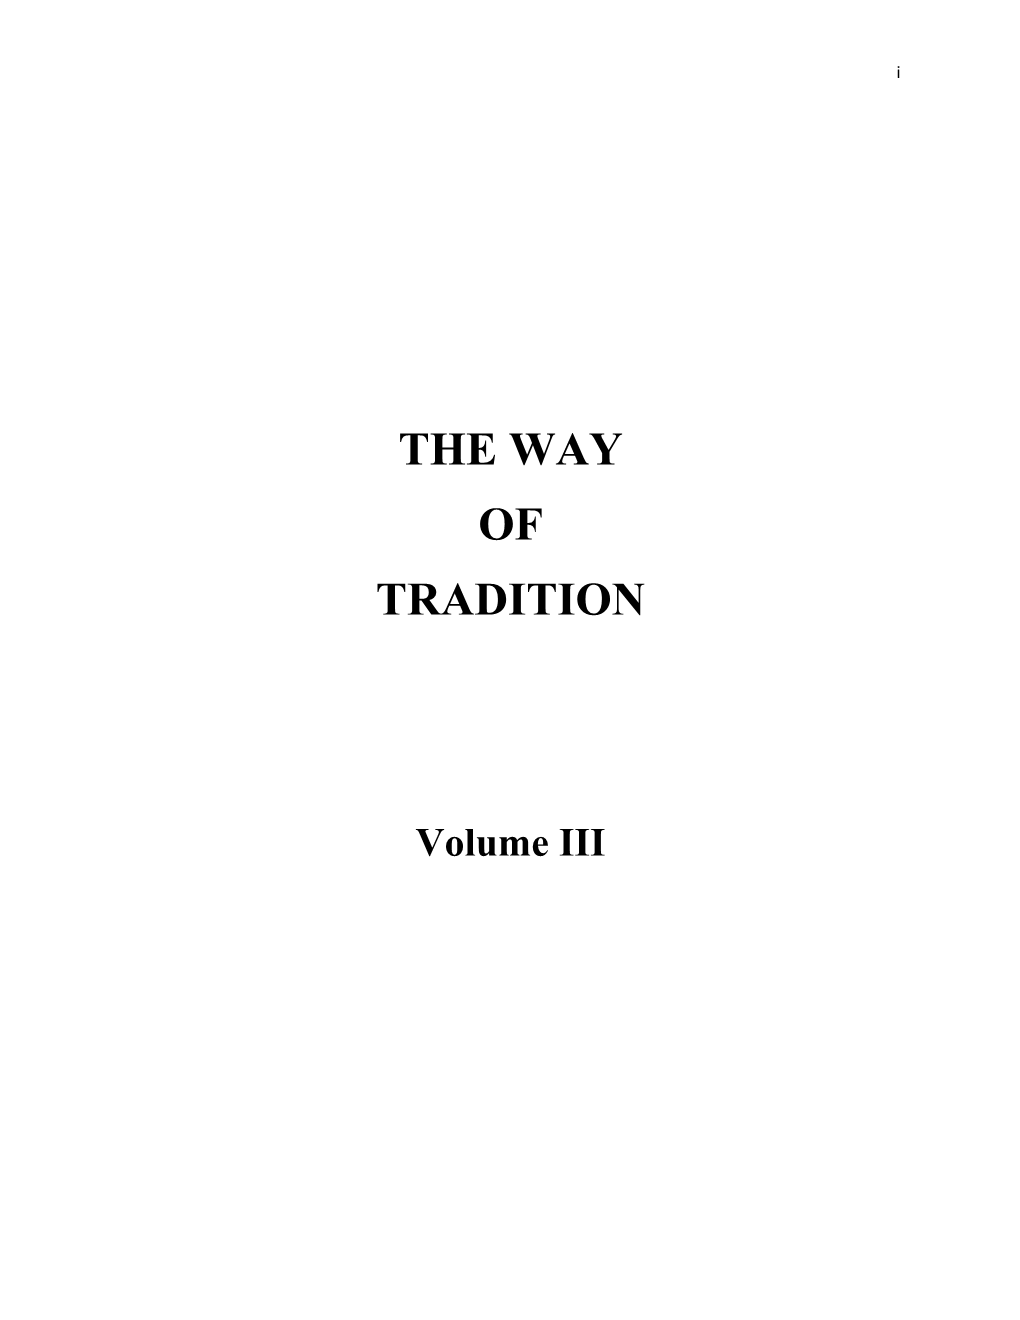 The Way of Tradition Volume